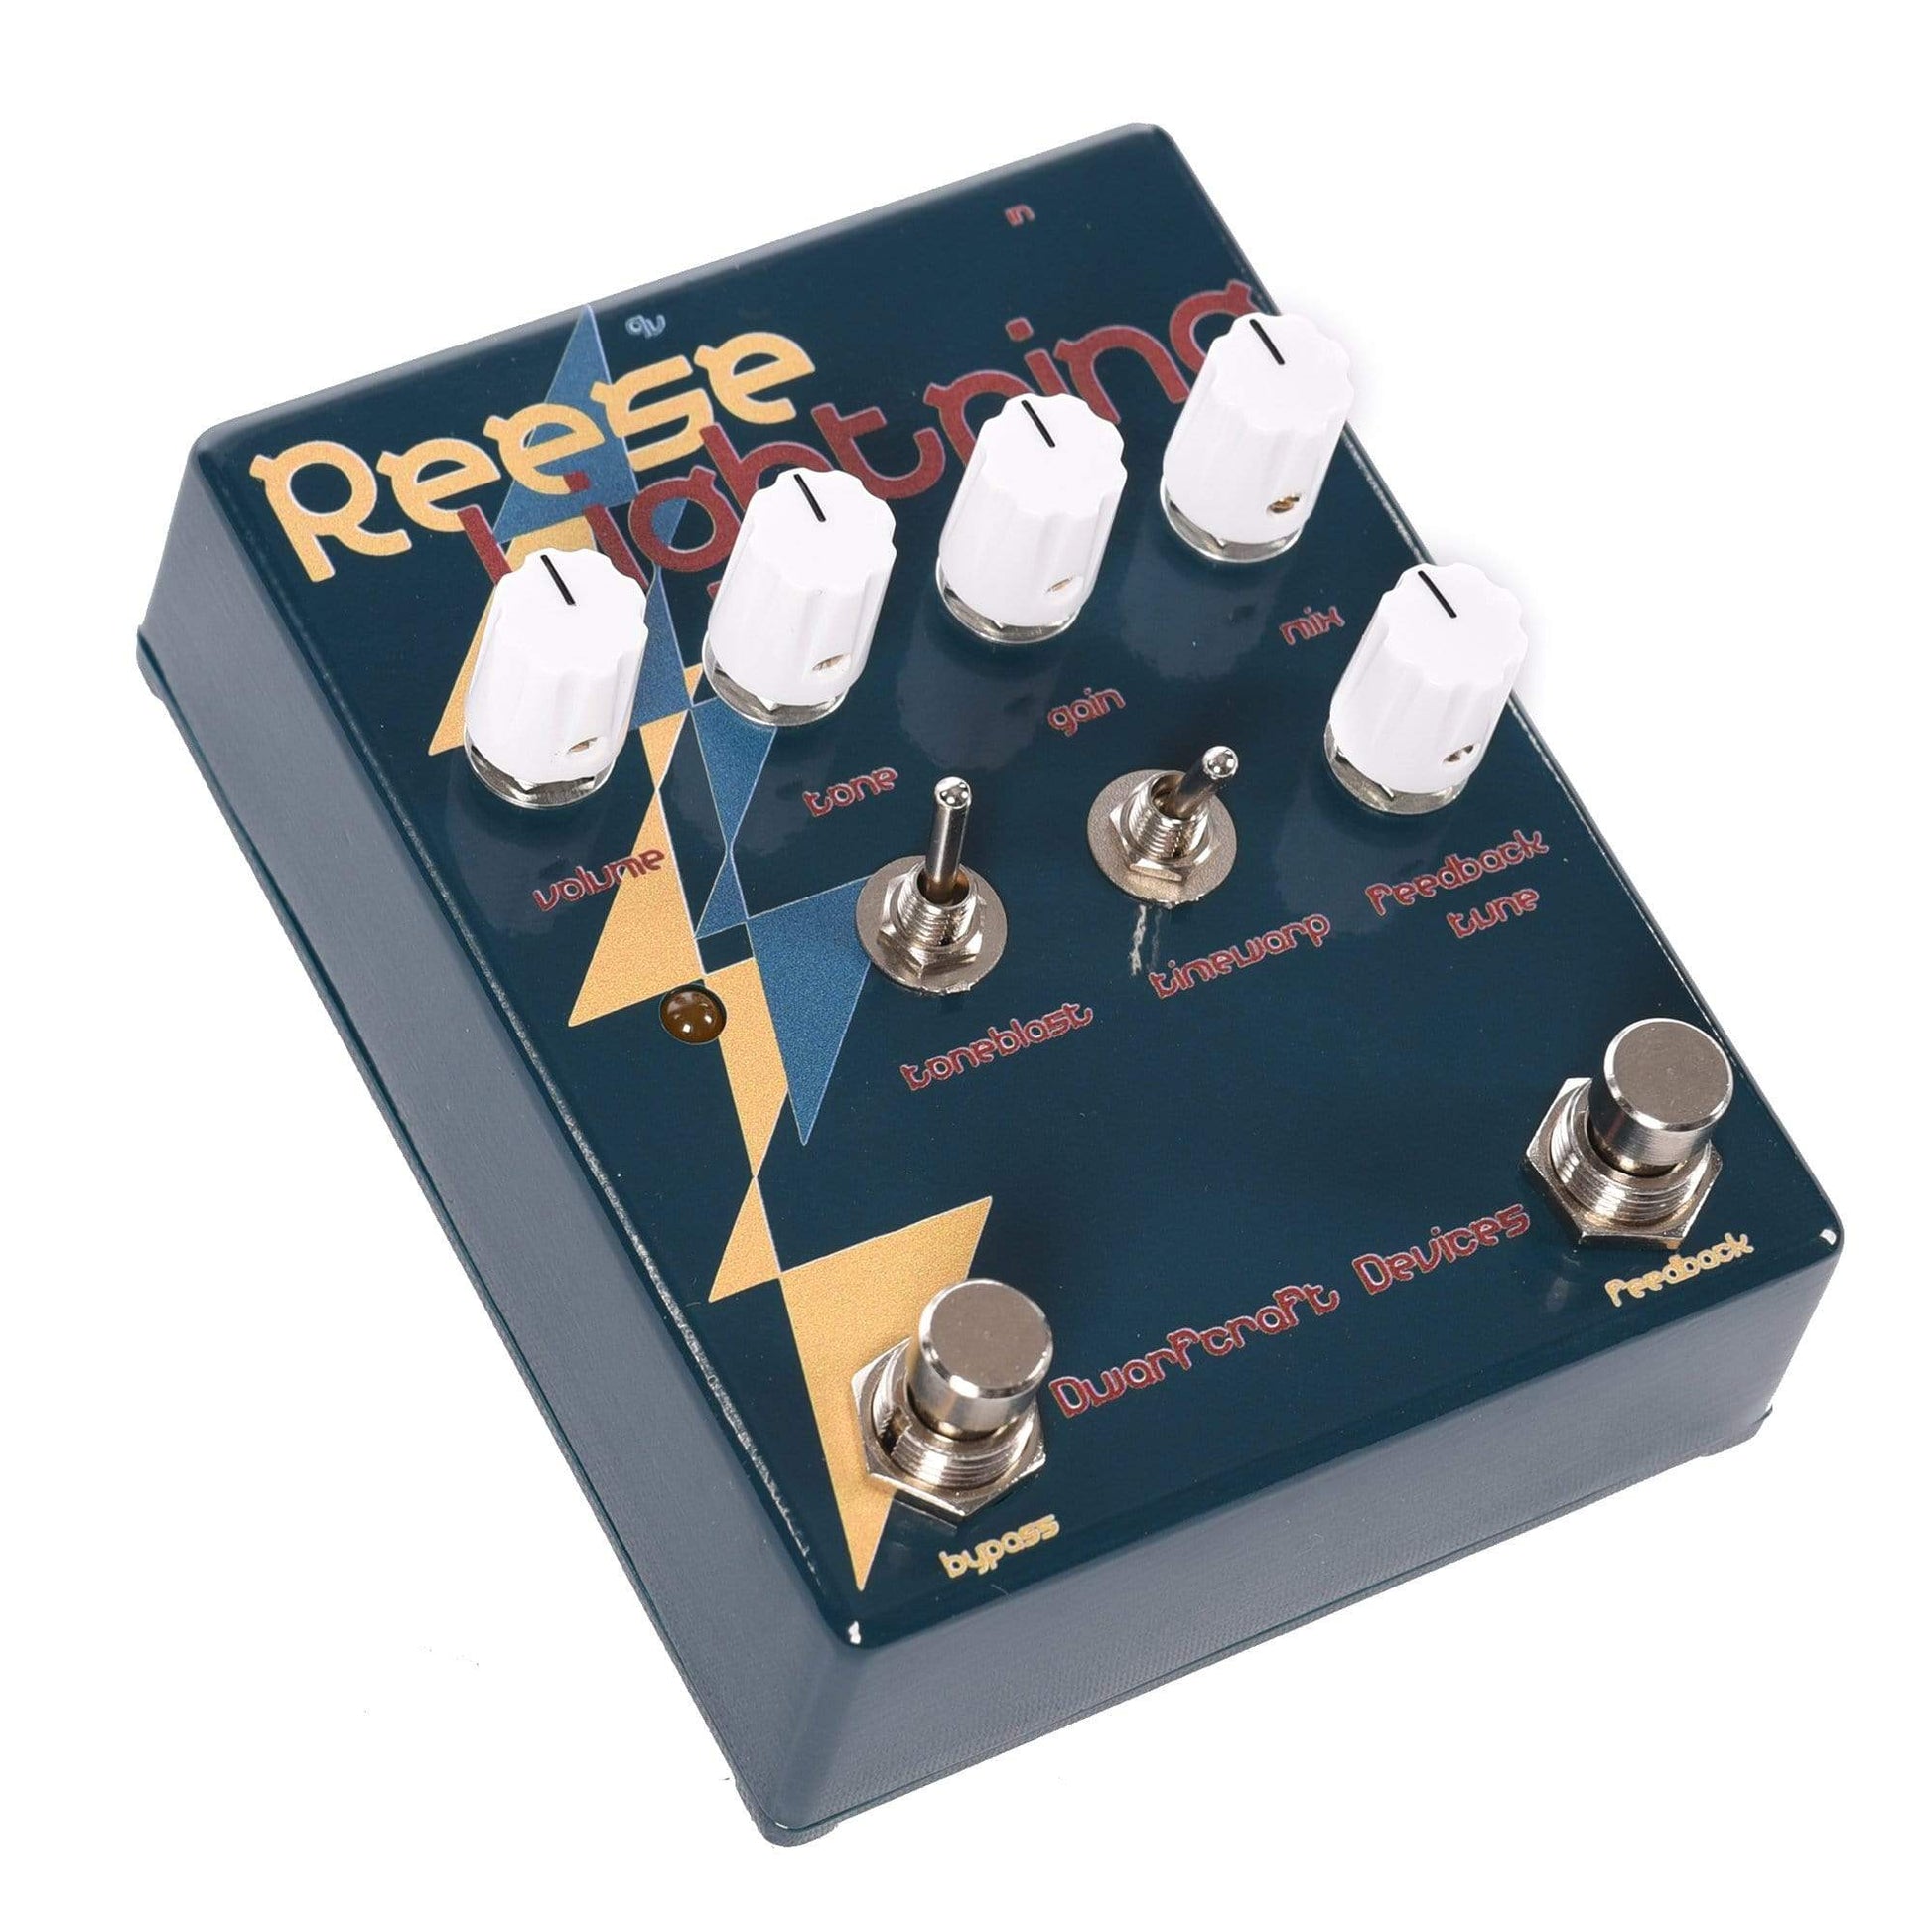 Dwarfcraft Devices Reese Lightning Fuzz Effects and Pedals / Fuzz